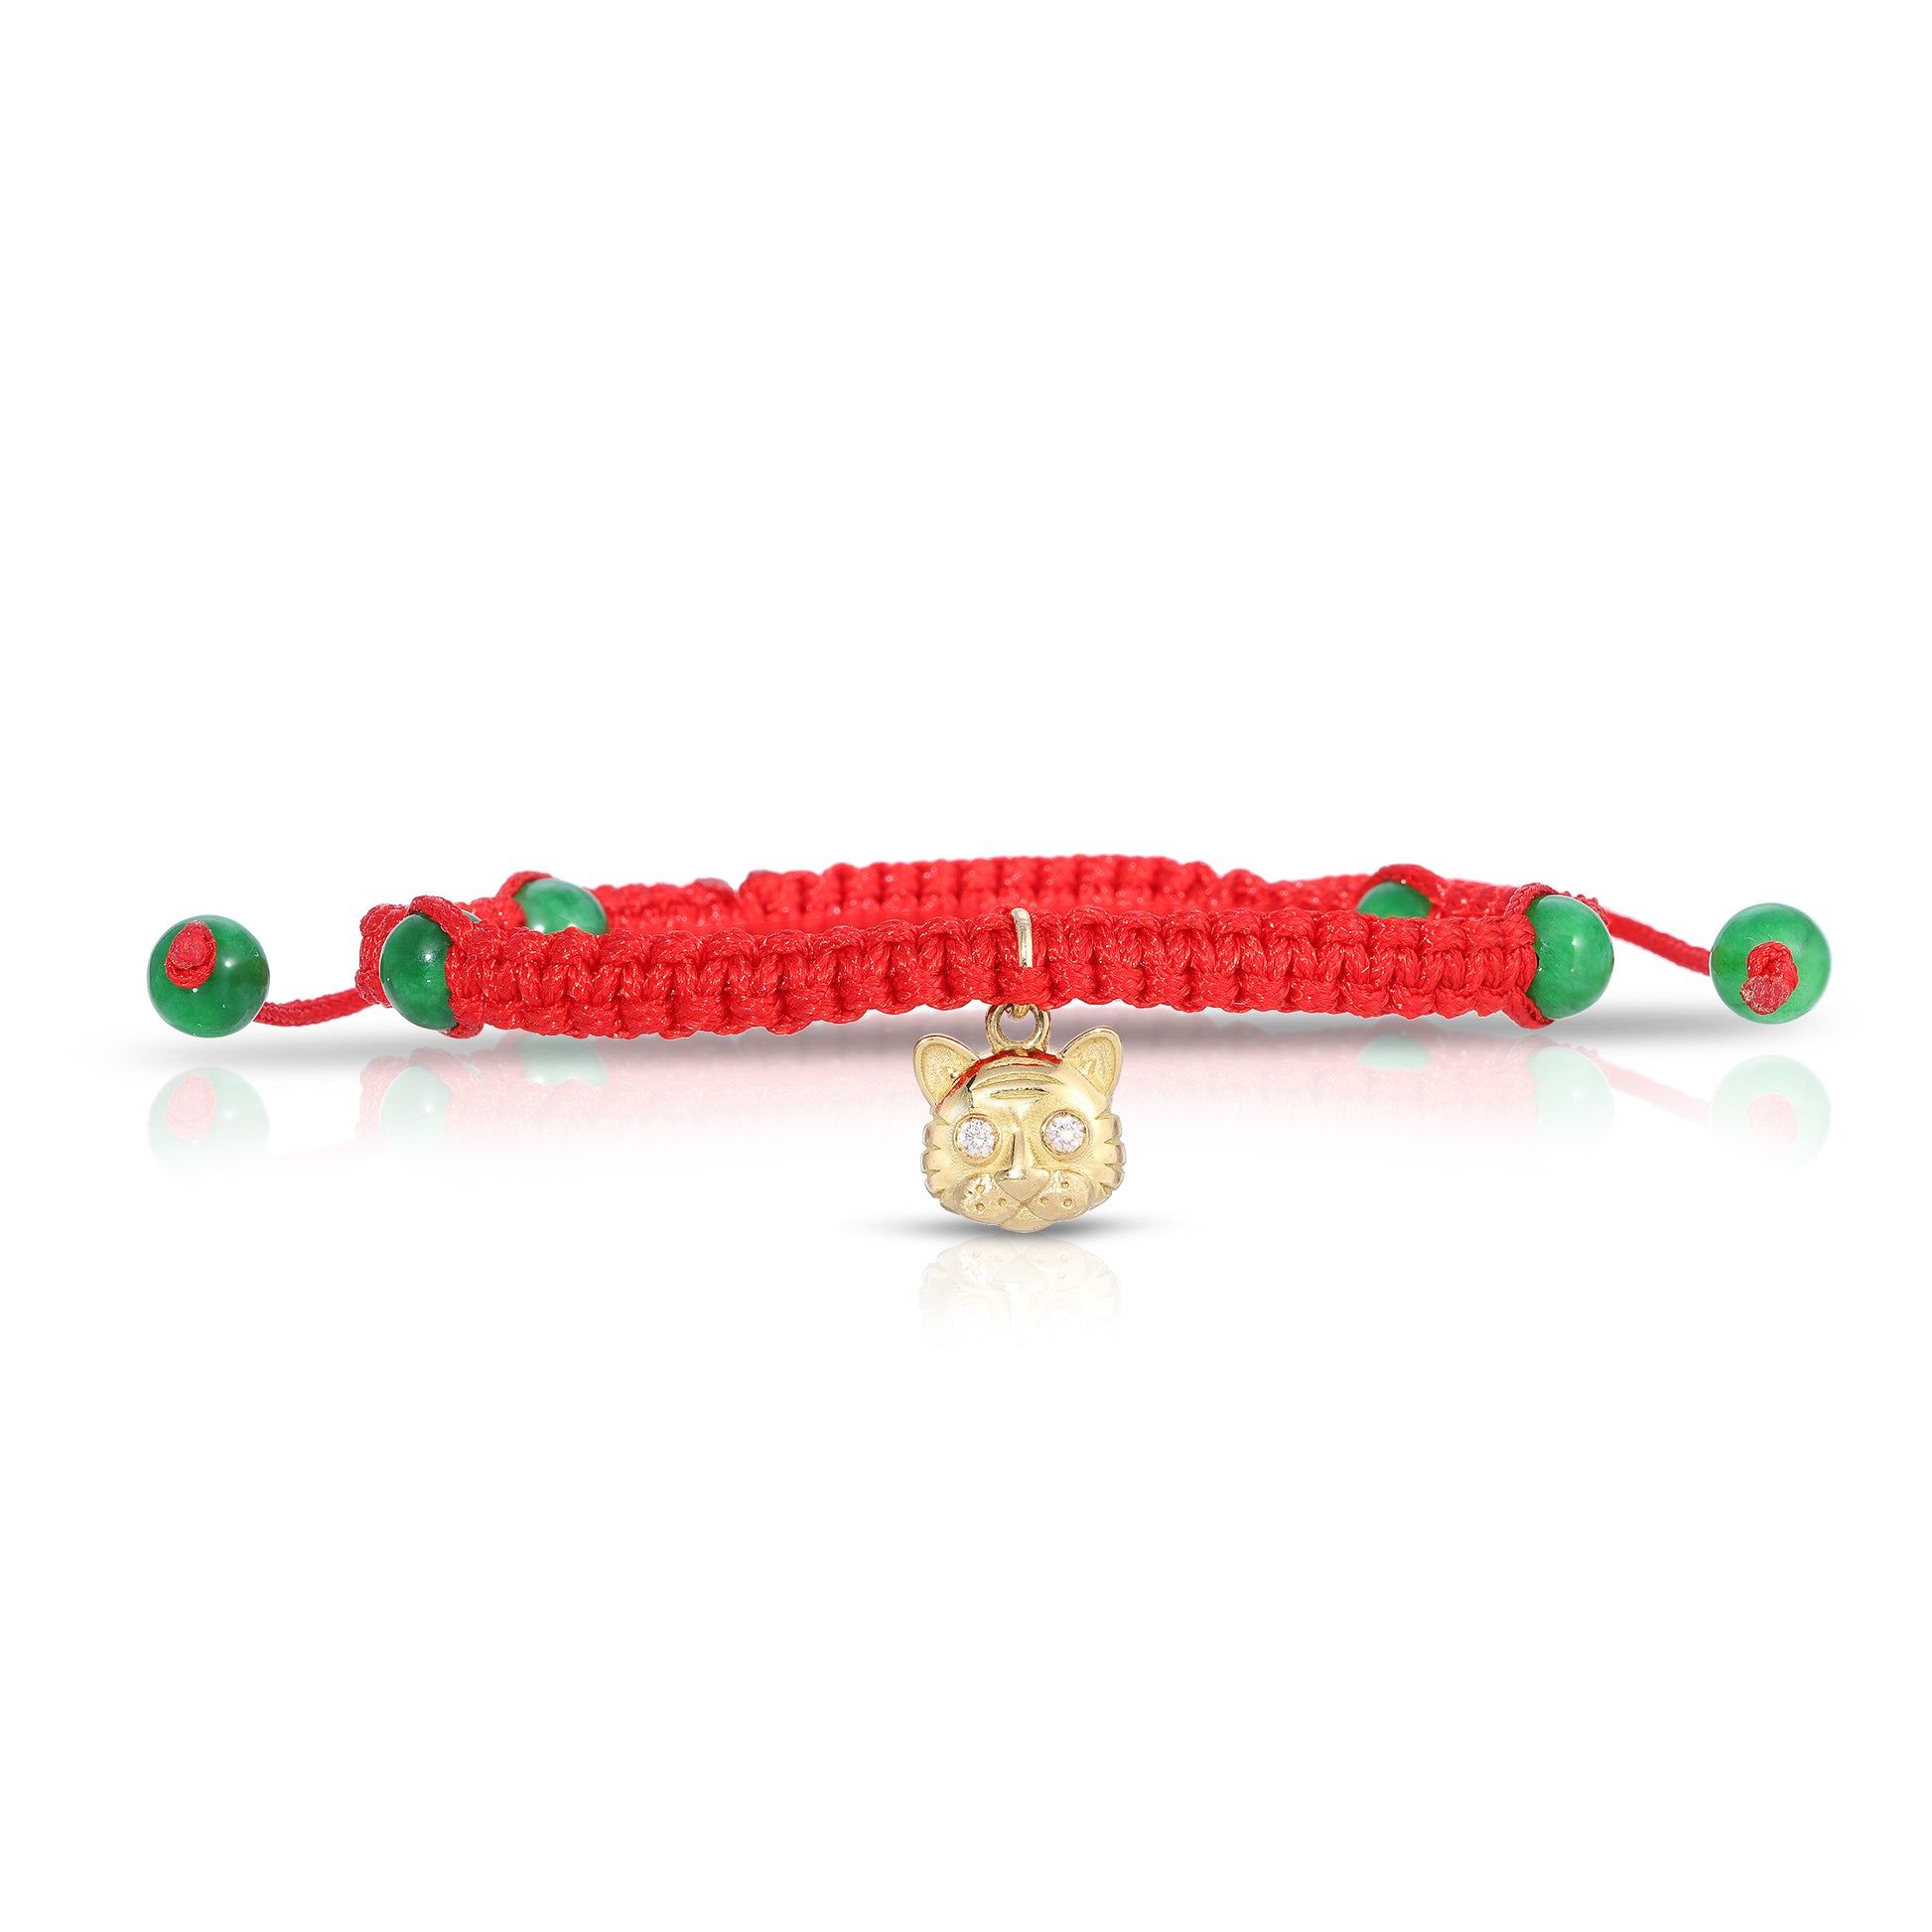 Bracelet with Tiger Charm - Front View